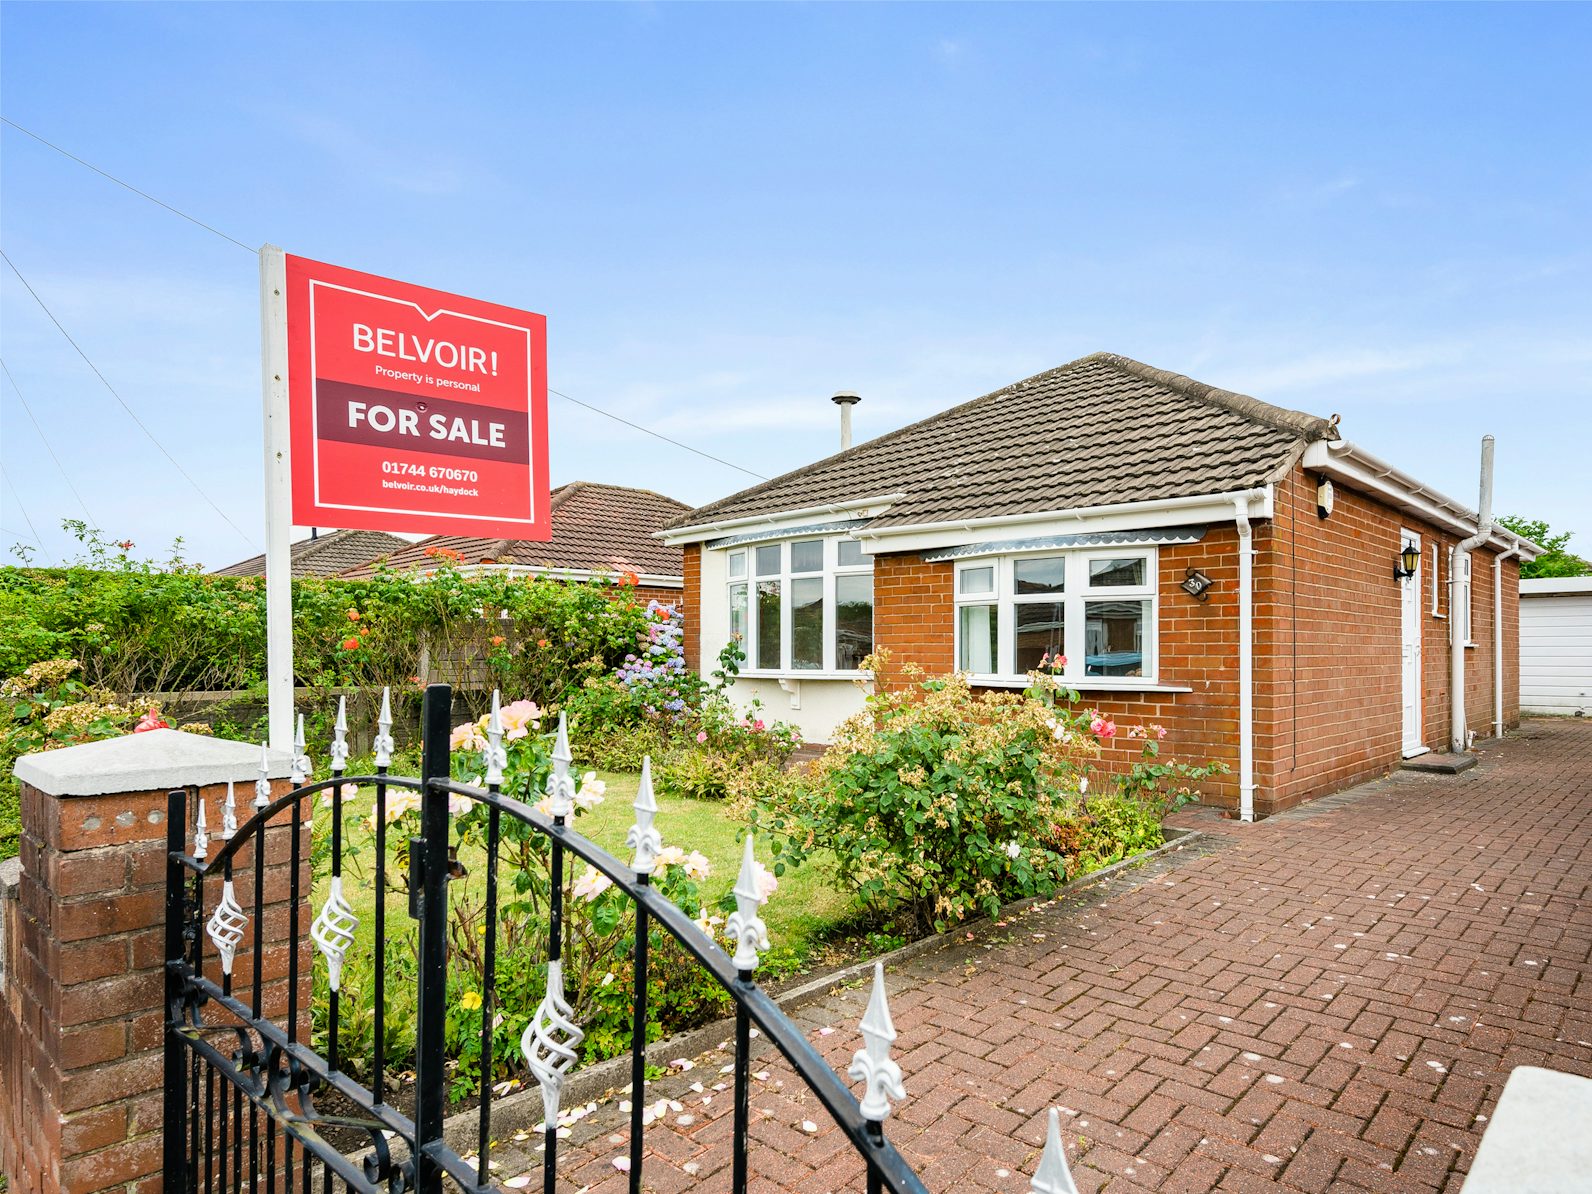 Bungalow for sale on Moore Drive Haydock, St Helens, WA11